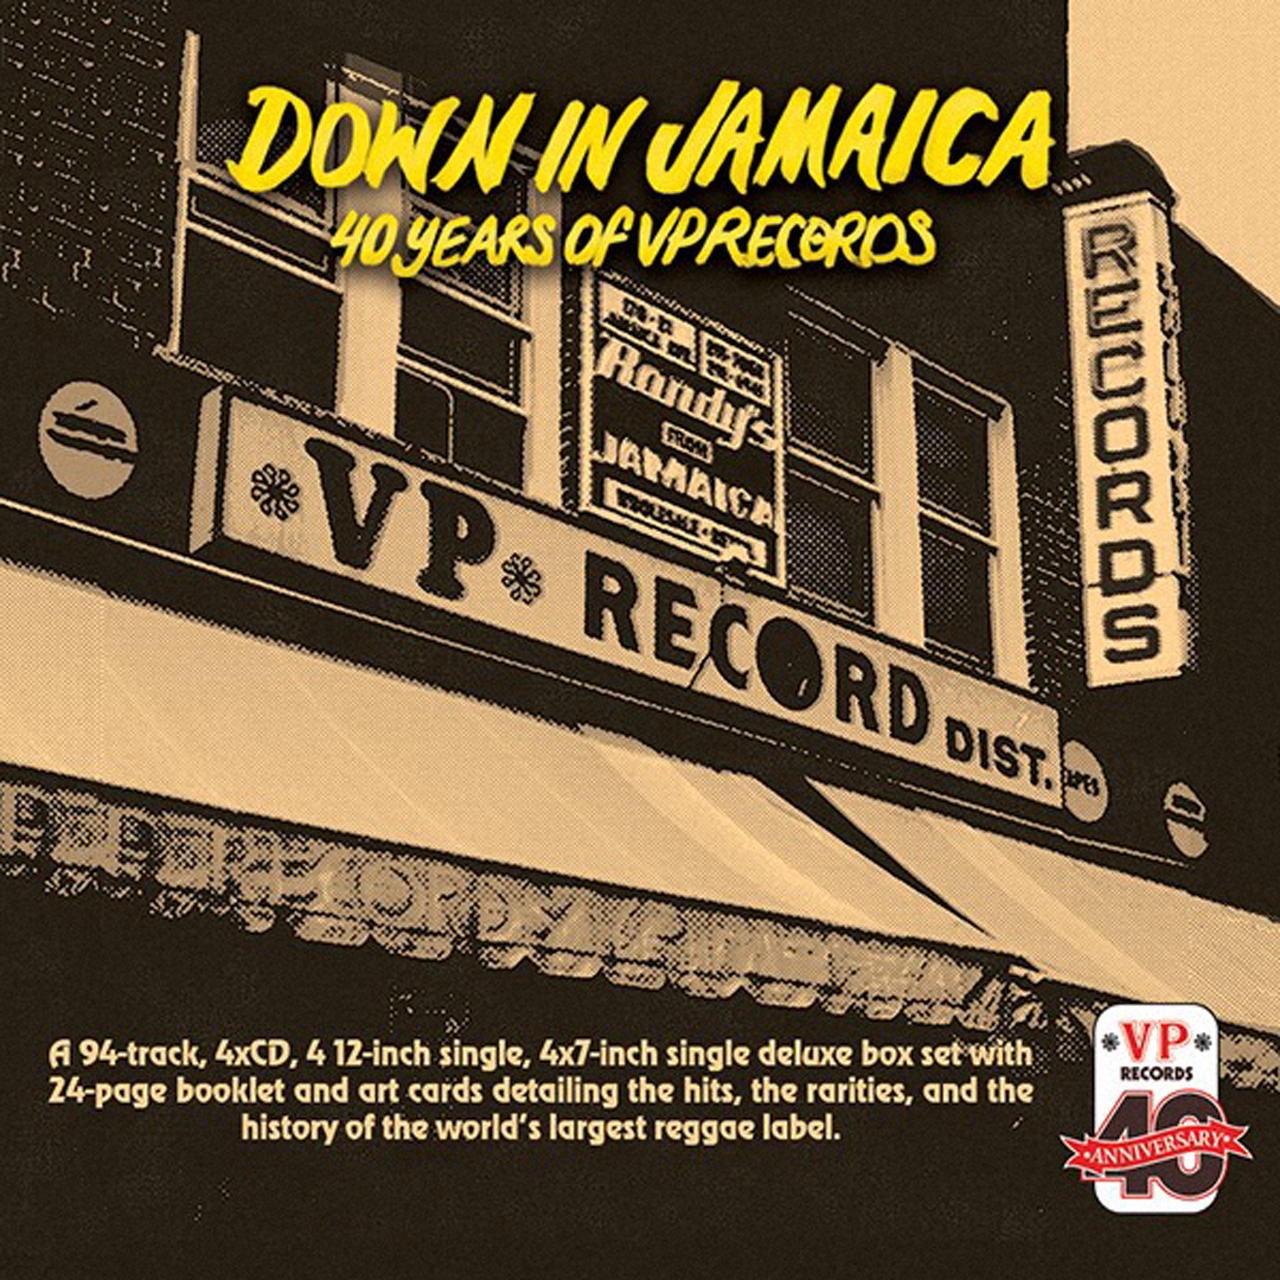 Down In Jamaica – 40 Years of VP Records